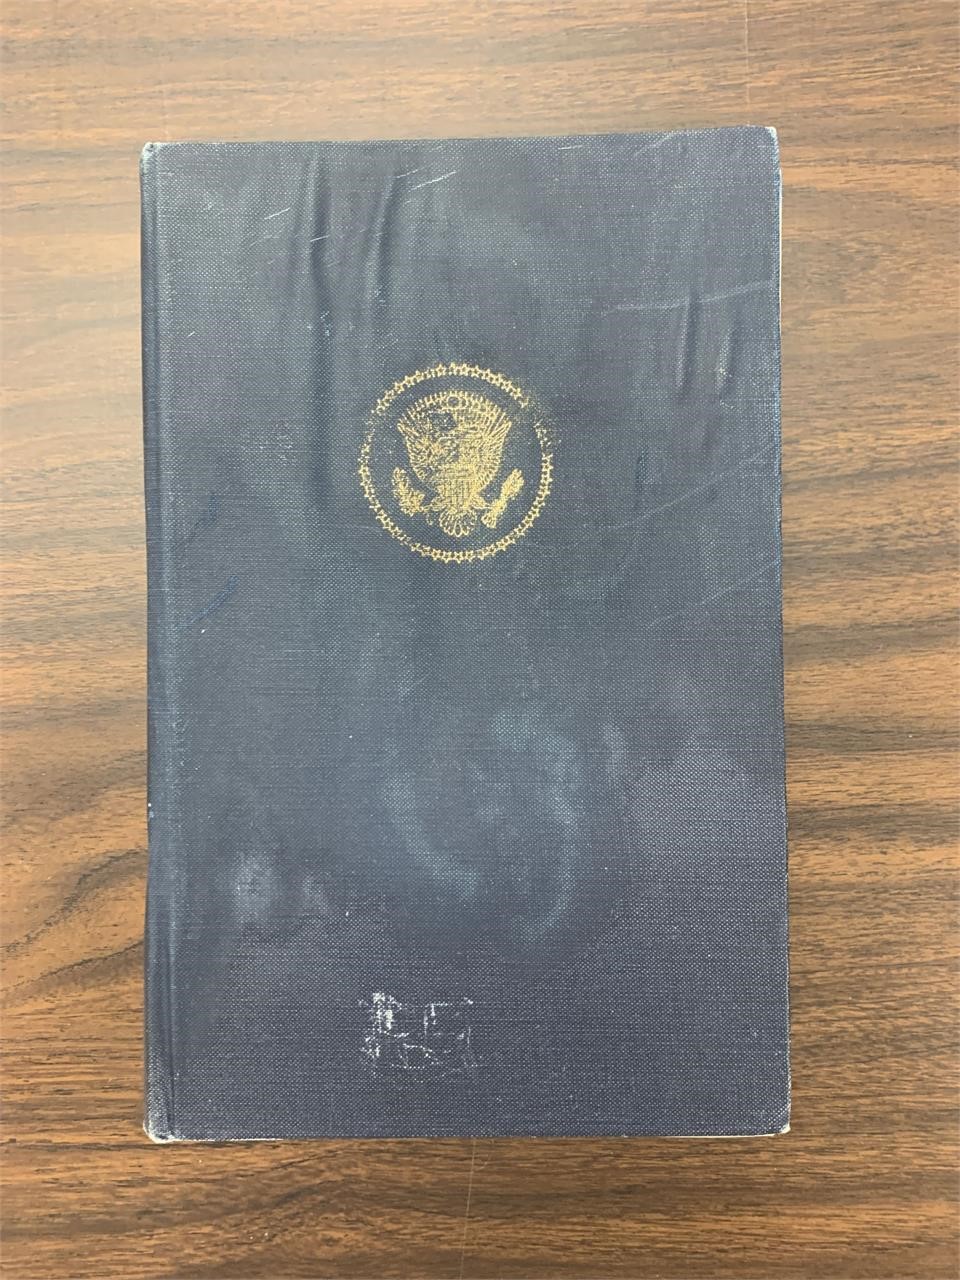 Warren Commission report/book signed by Gerald For